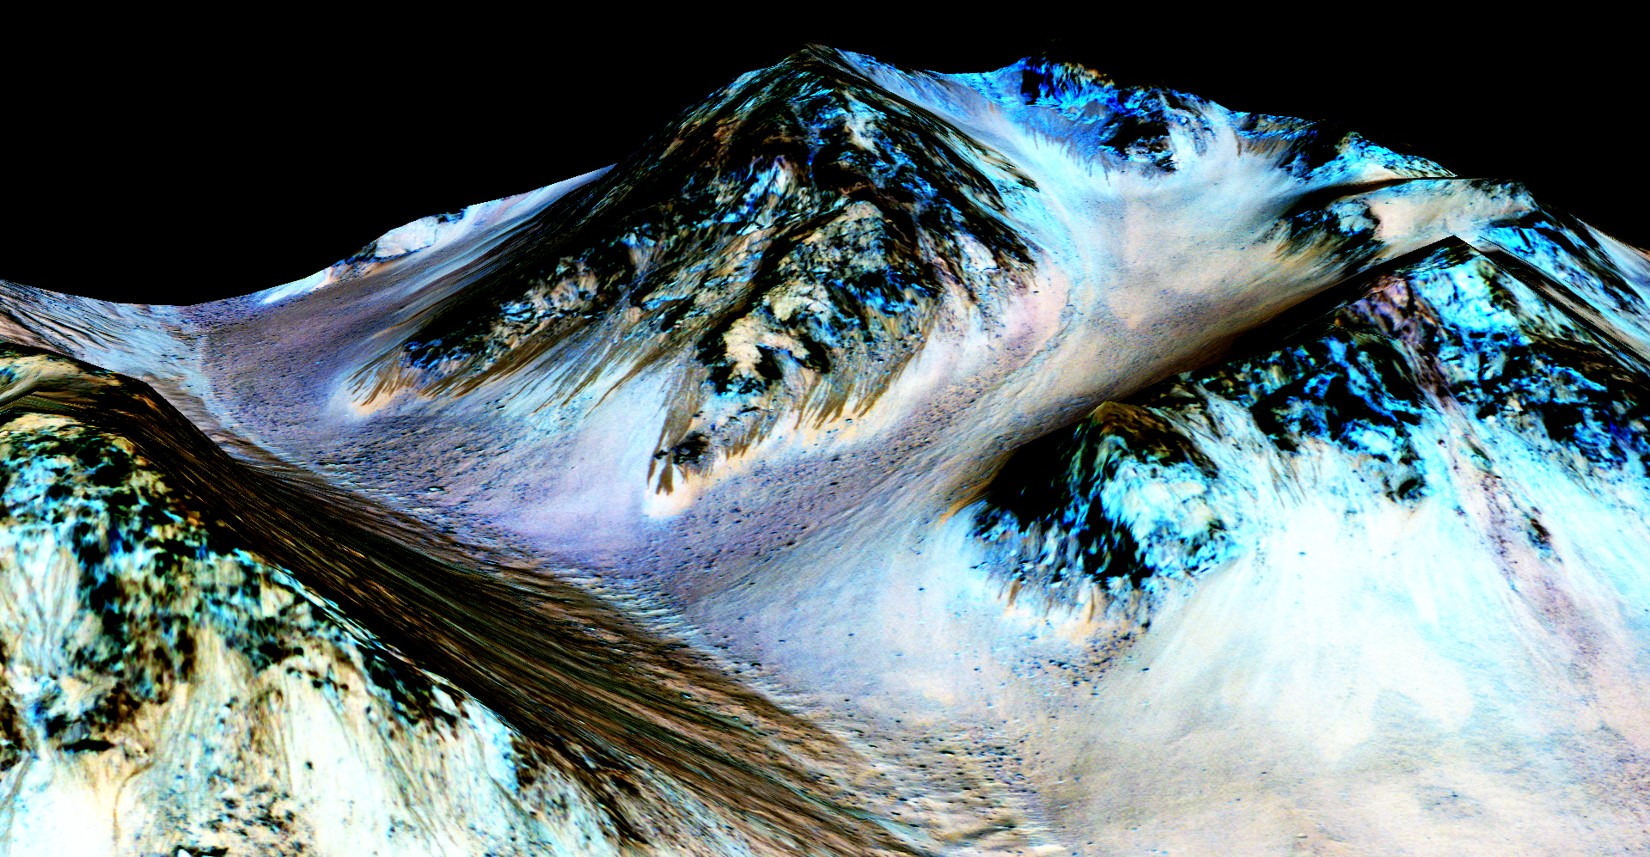 NASA scientists claim enough oxygen can be in the salted water on Mars